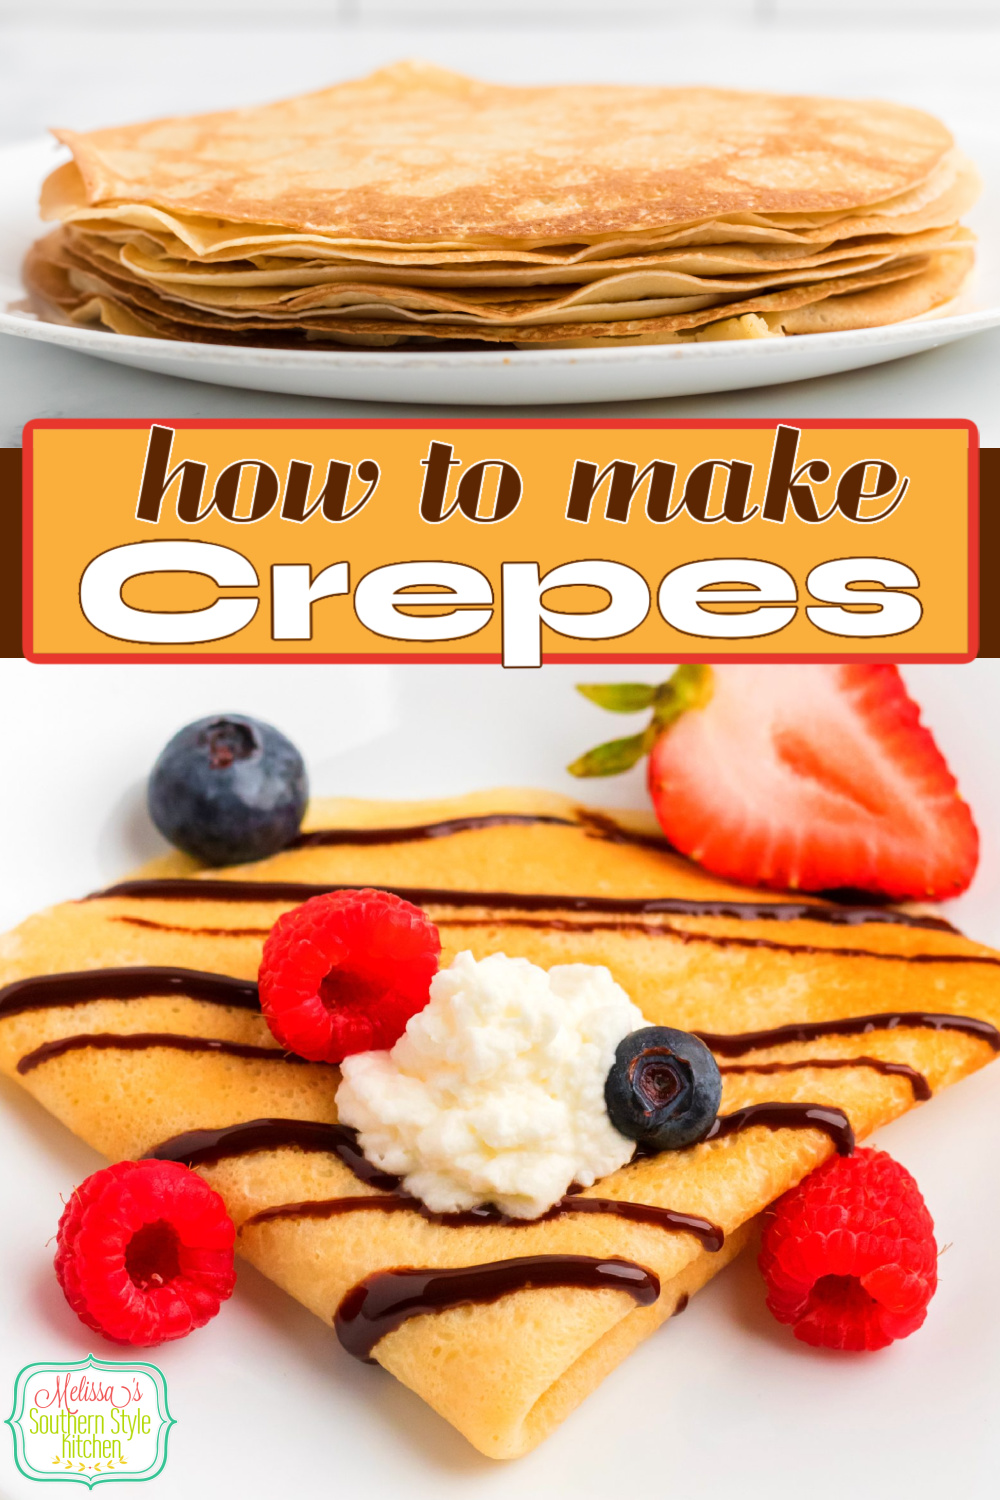 This easy Crepes recipe can be drizzled with chocolate and filled with pastry cream, whipped cream or simply dusted with powdered sugar #crepes #easycrepesrecipe #howtomakecrepes #frenchcrepesrecipe #easycrepes via @melissasssk